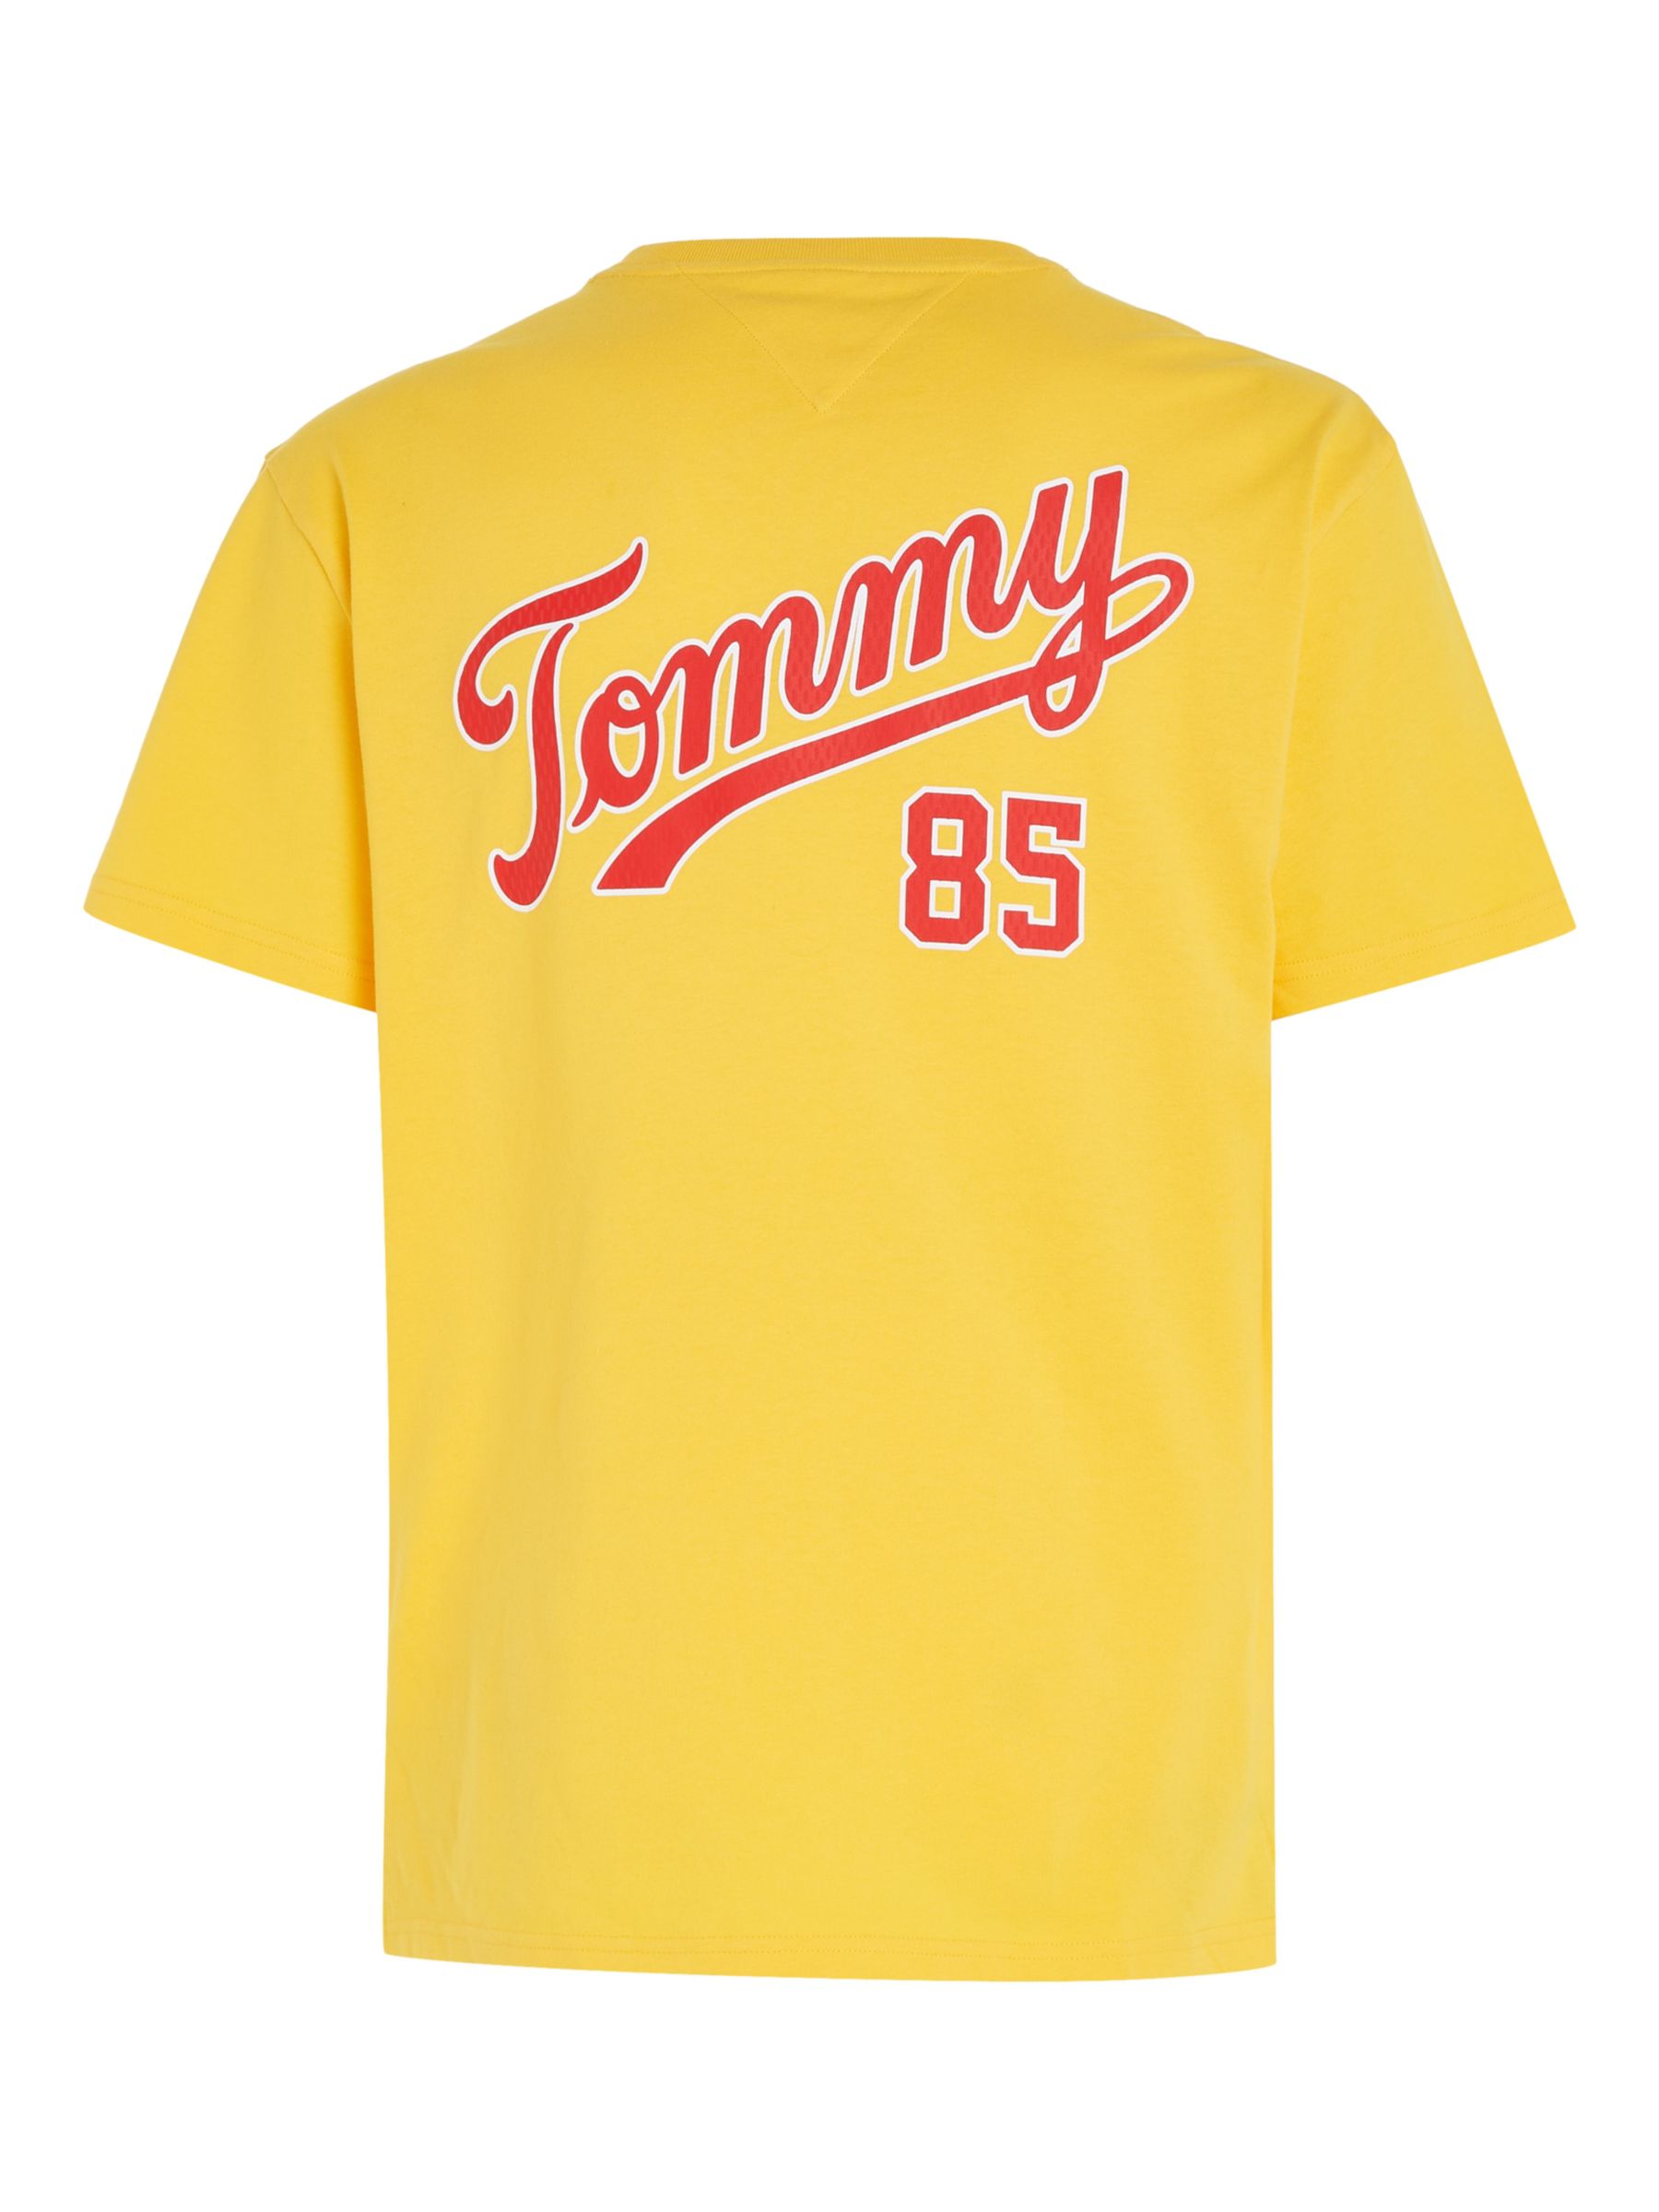 Tommy Jeans John Partners College Yellow Cotton 85 Lewis & Organic at Warm T-Shirt, Logo